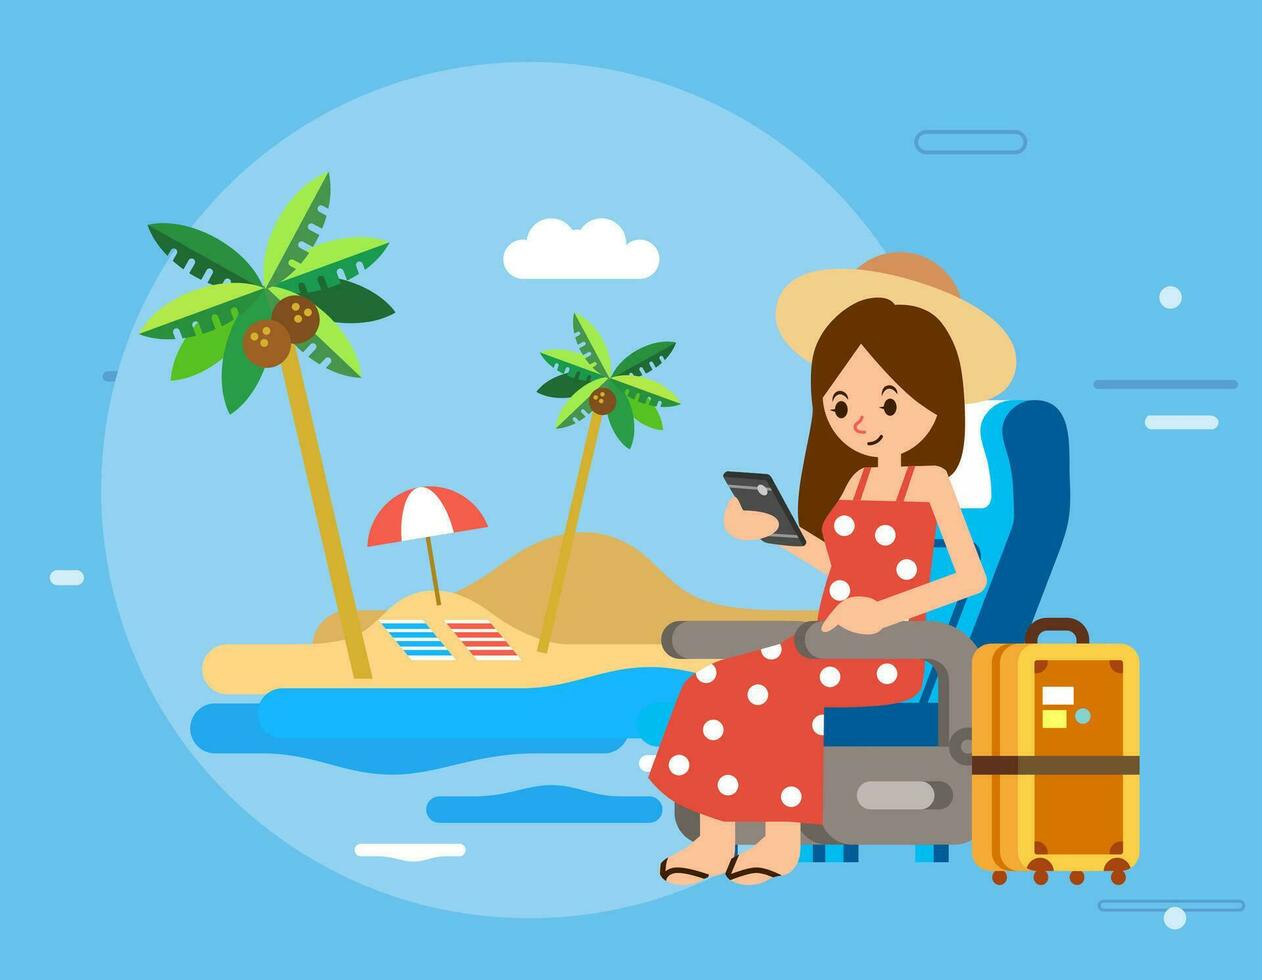 women character holding smartphone,sit on transportation chair and going vacation on beach, suitcase beside, and beach as a background vector illustration